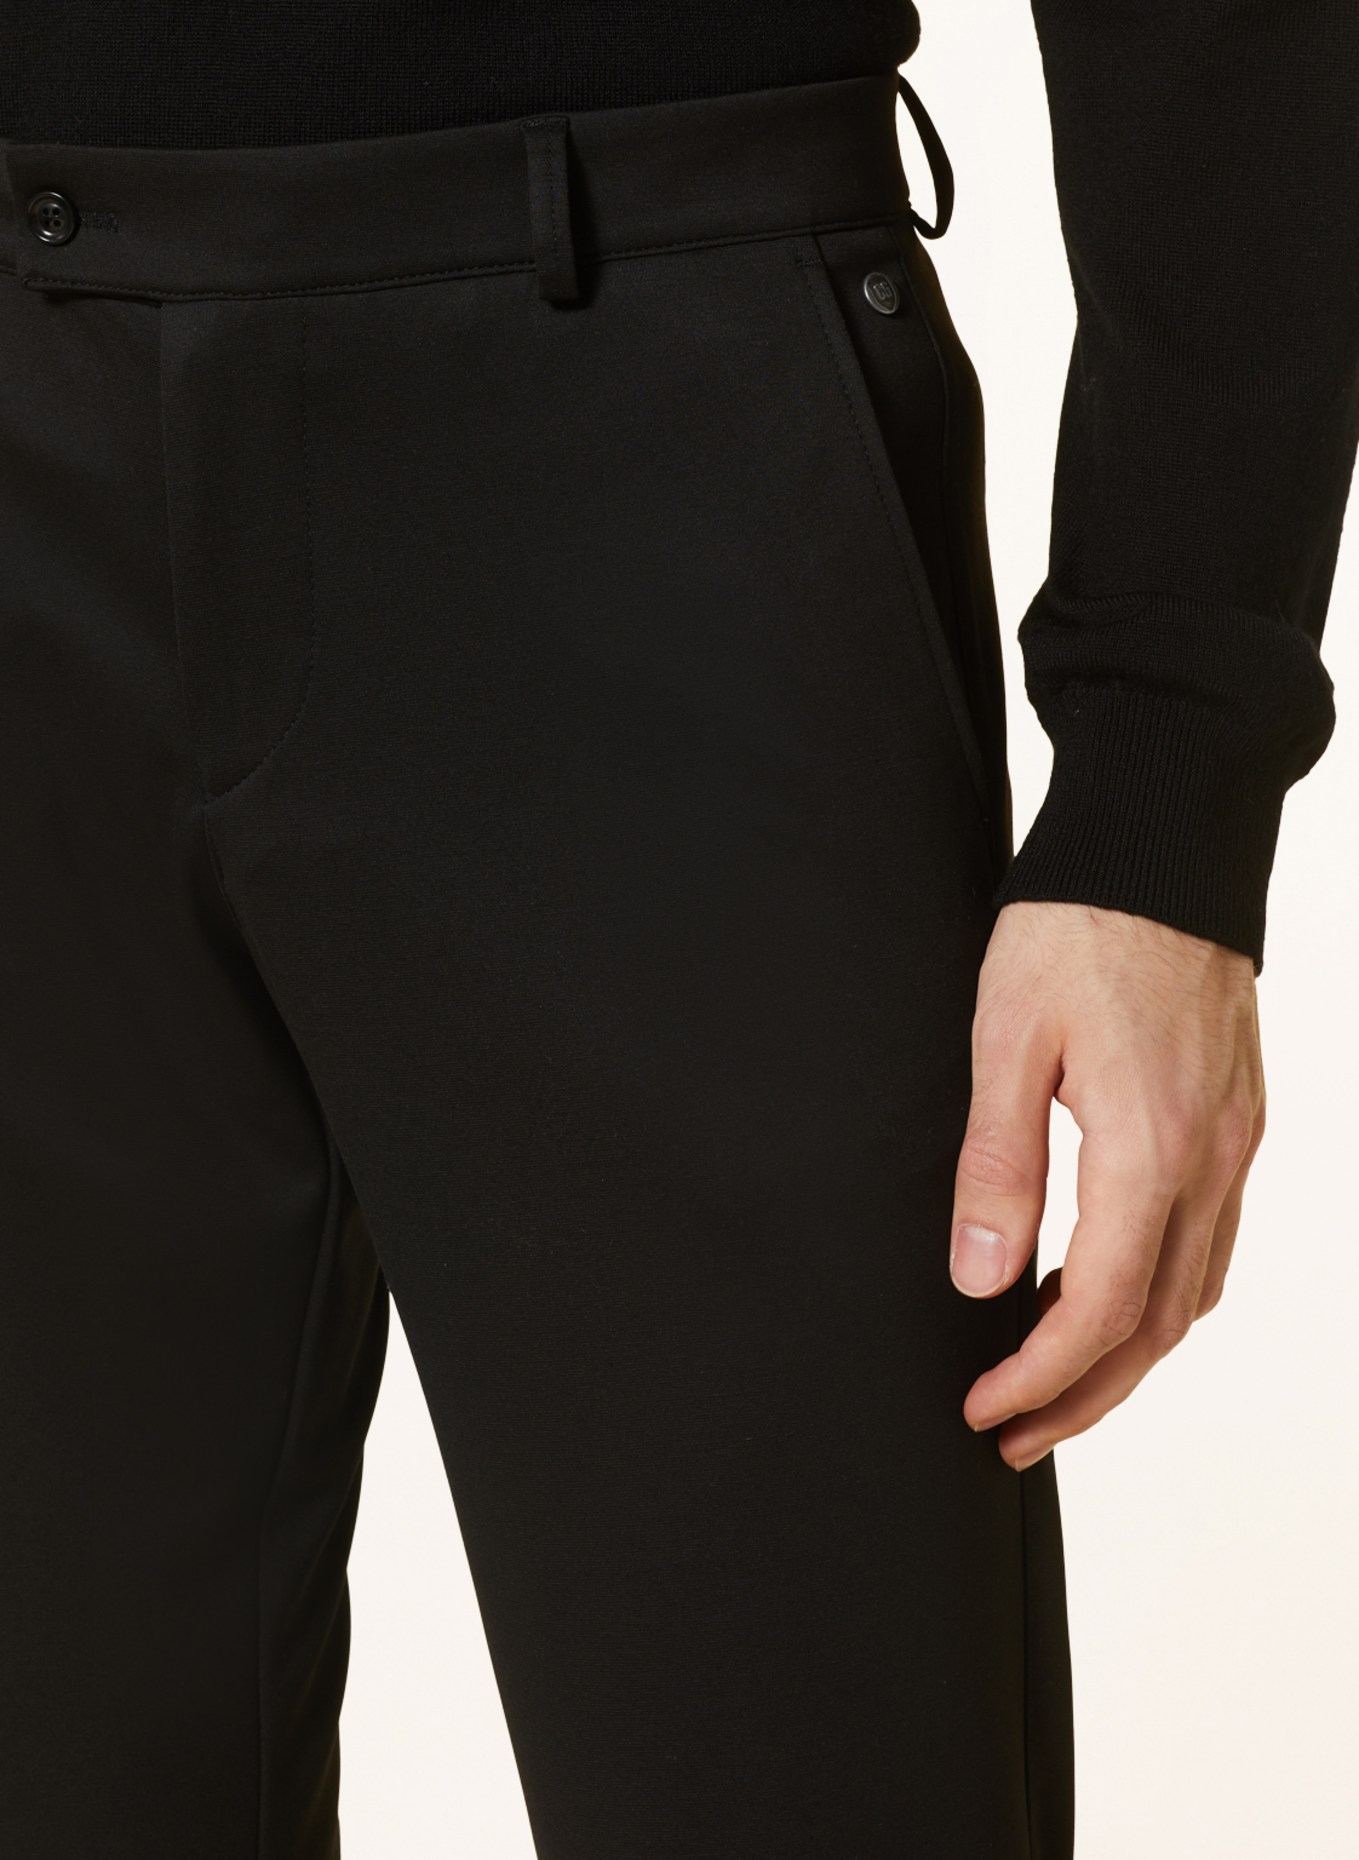 CG - CLUB of GENTS Suit trousers slim fit in jersey, Color: 90 SCHWARZ (Image 6)